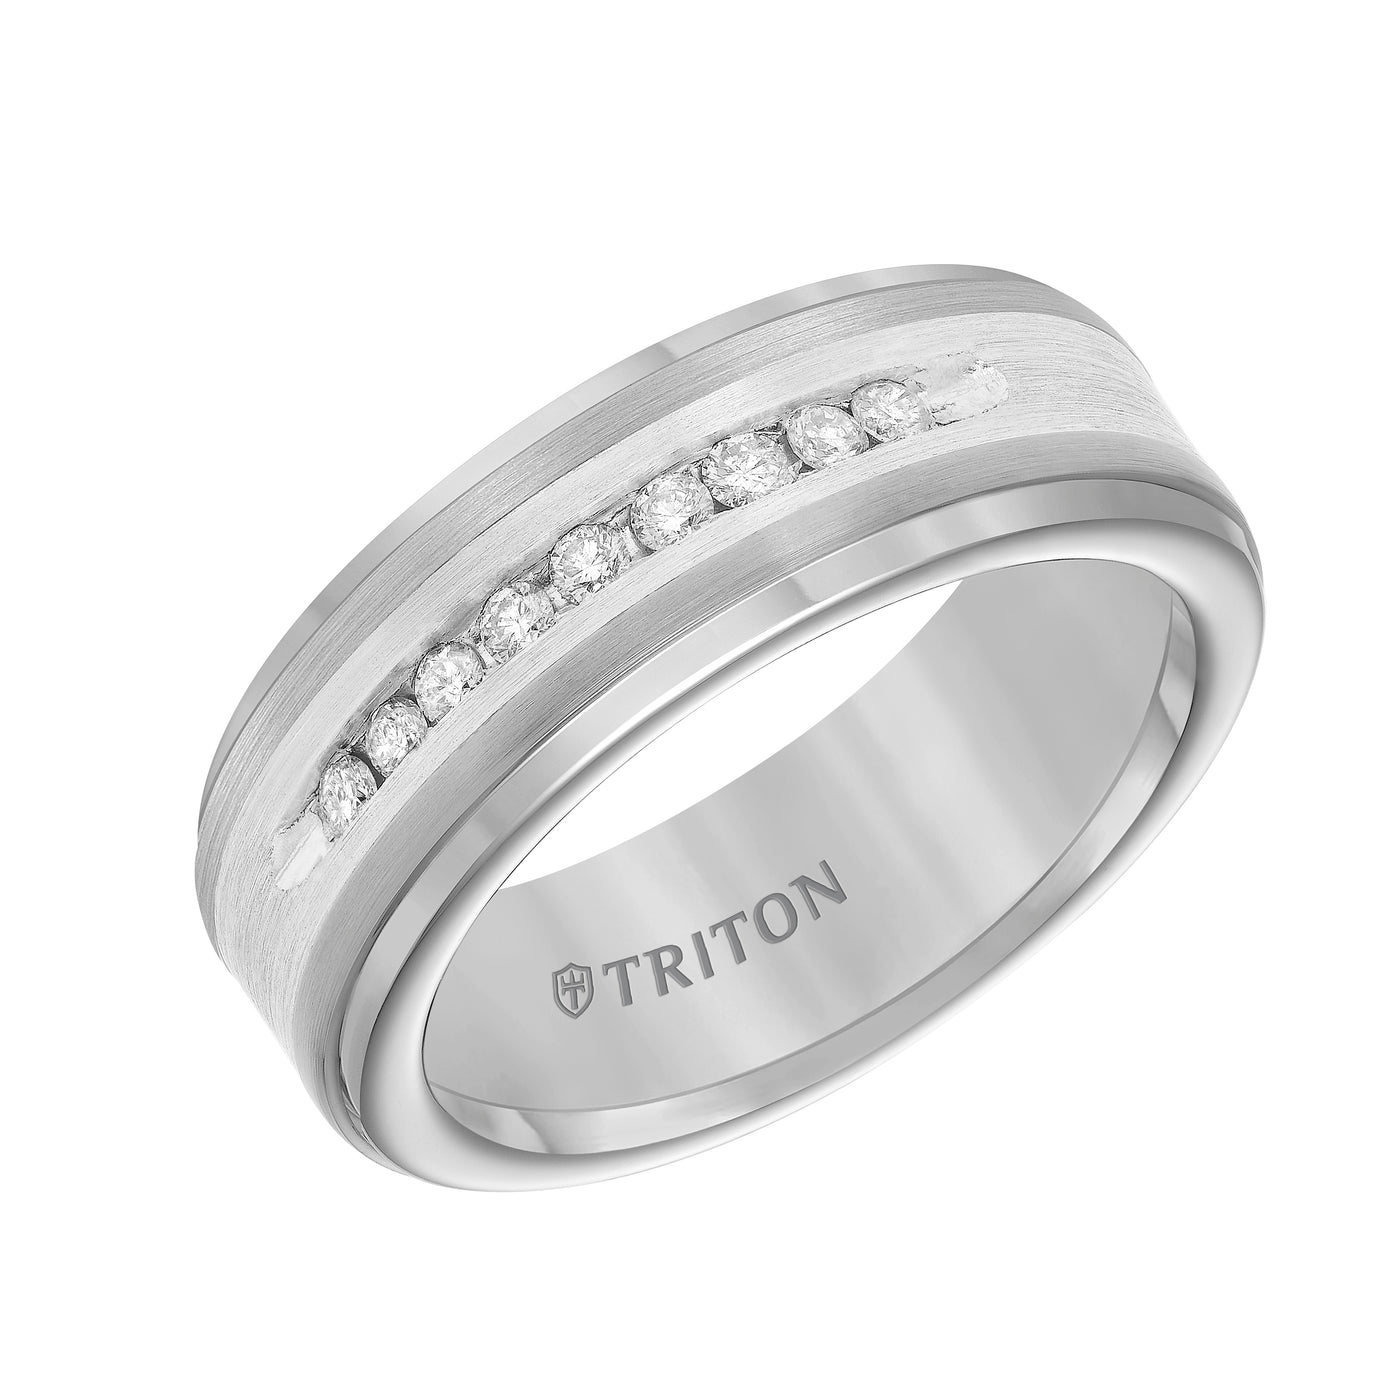 8mm Tungsten Carbide Step Edge Comfort Fit Band with Satin Finish Silver Inlay and Channel Set diamonds.